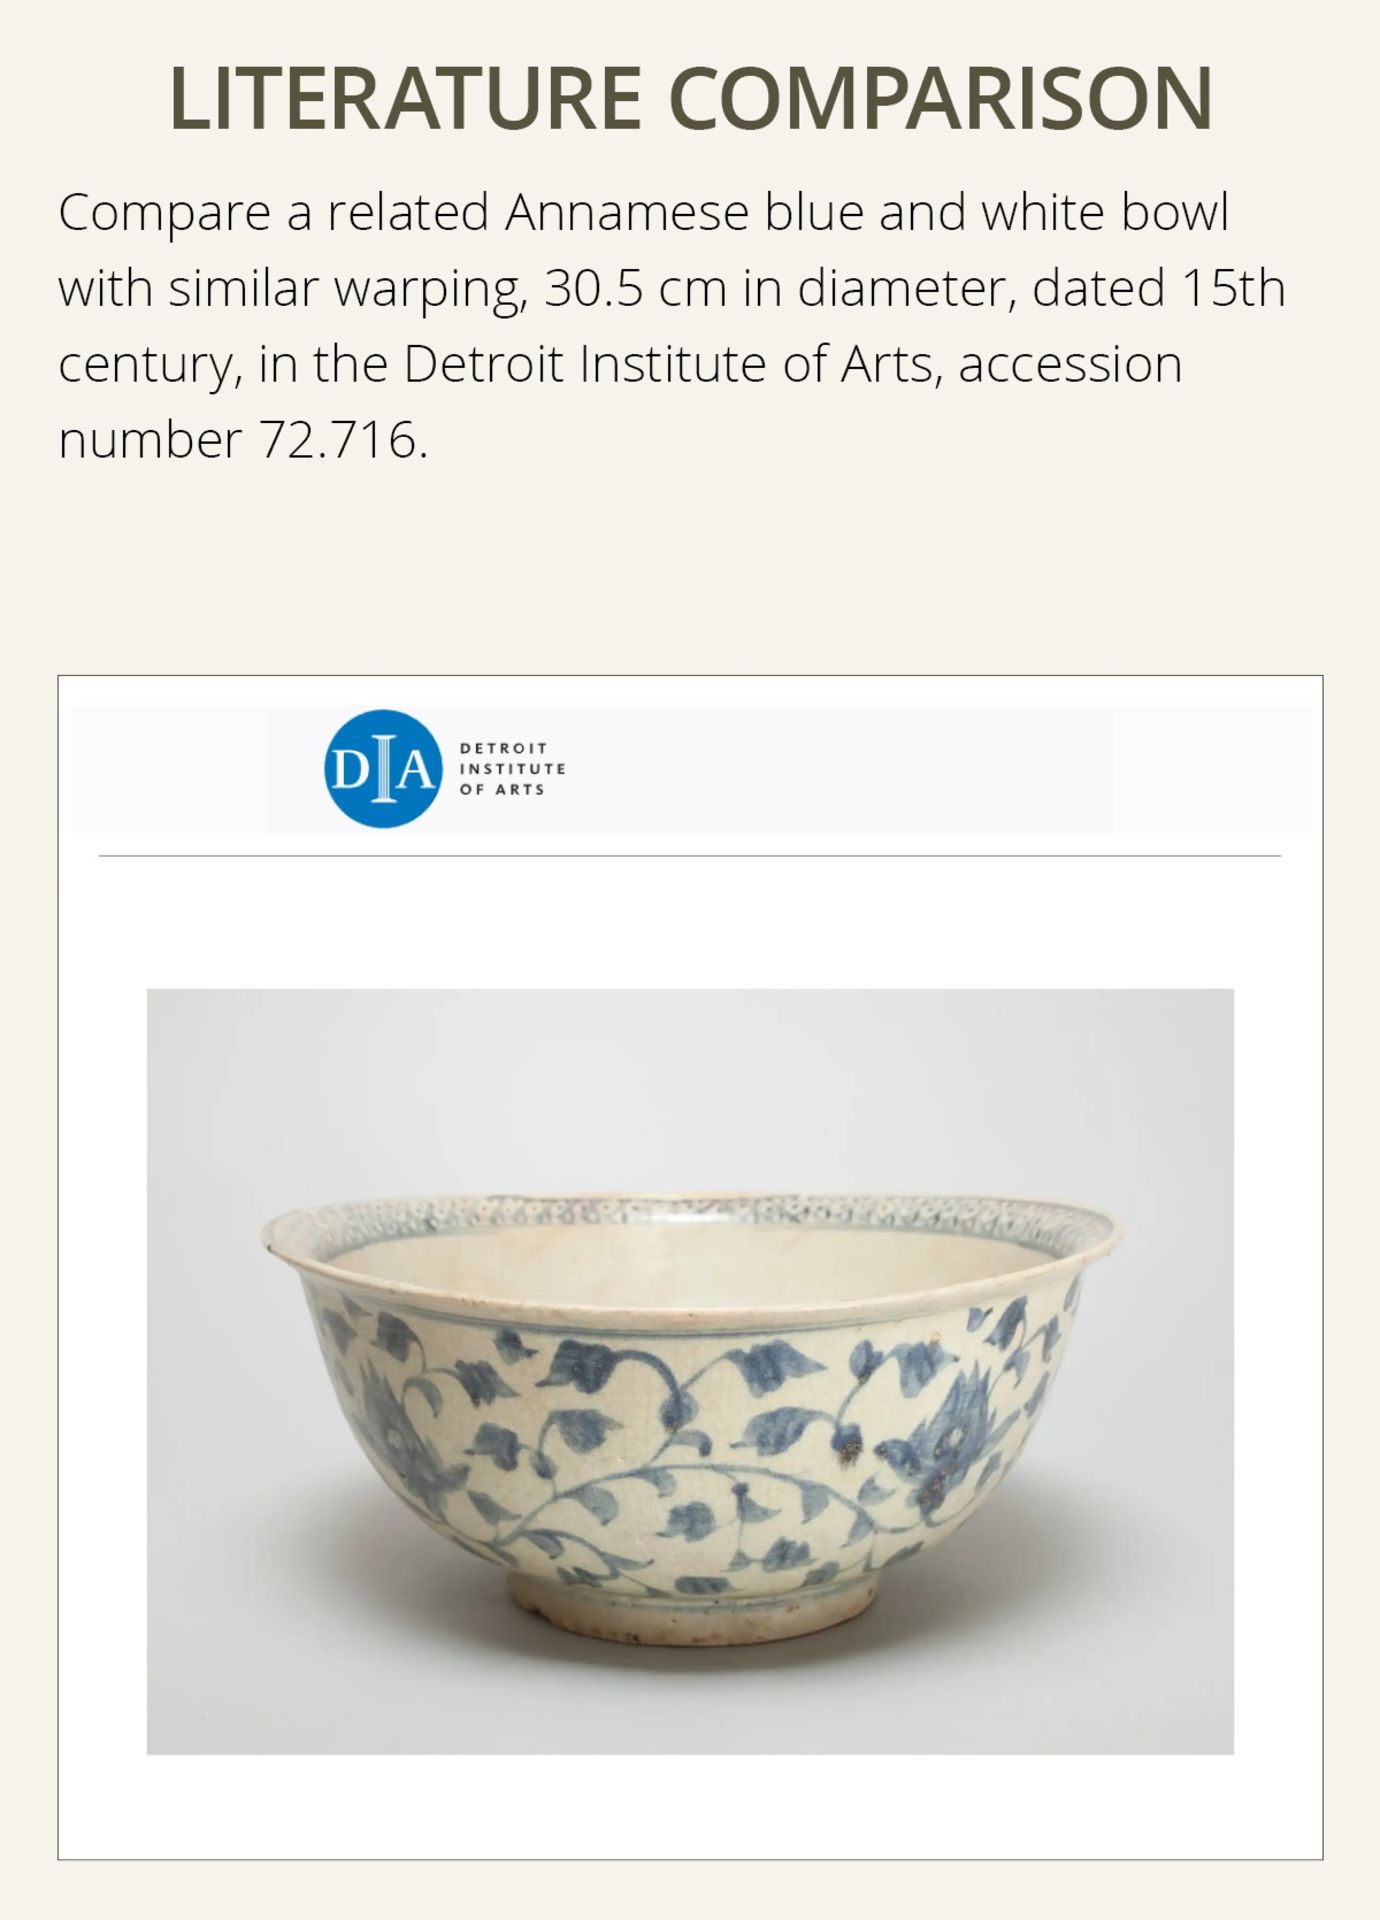 A LARGE ANNAMESE BLUE AND WHITE BOWL, VIETNAM, 14TH-15TH CENTURY - Image 5 of 12